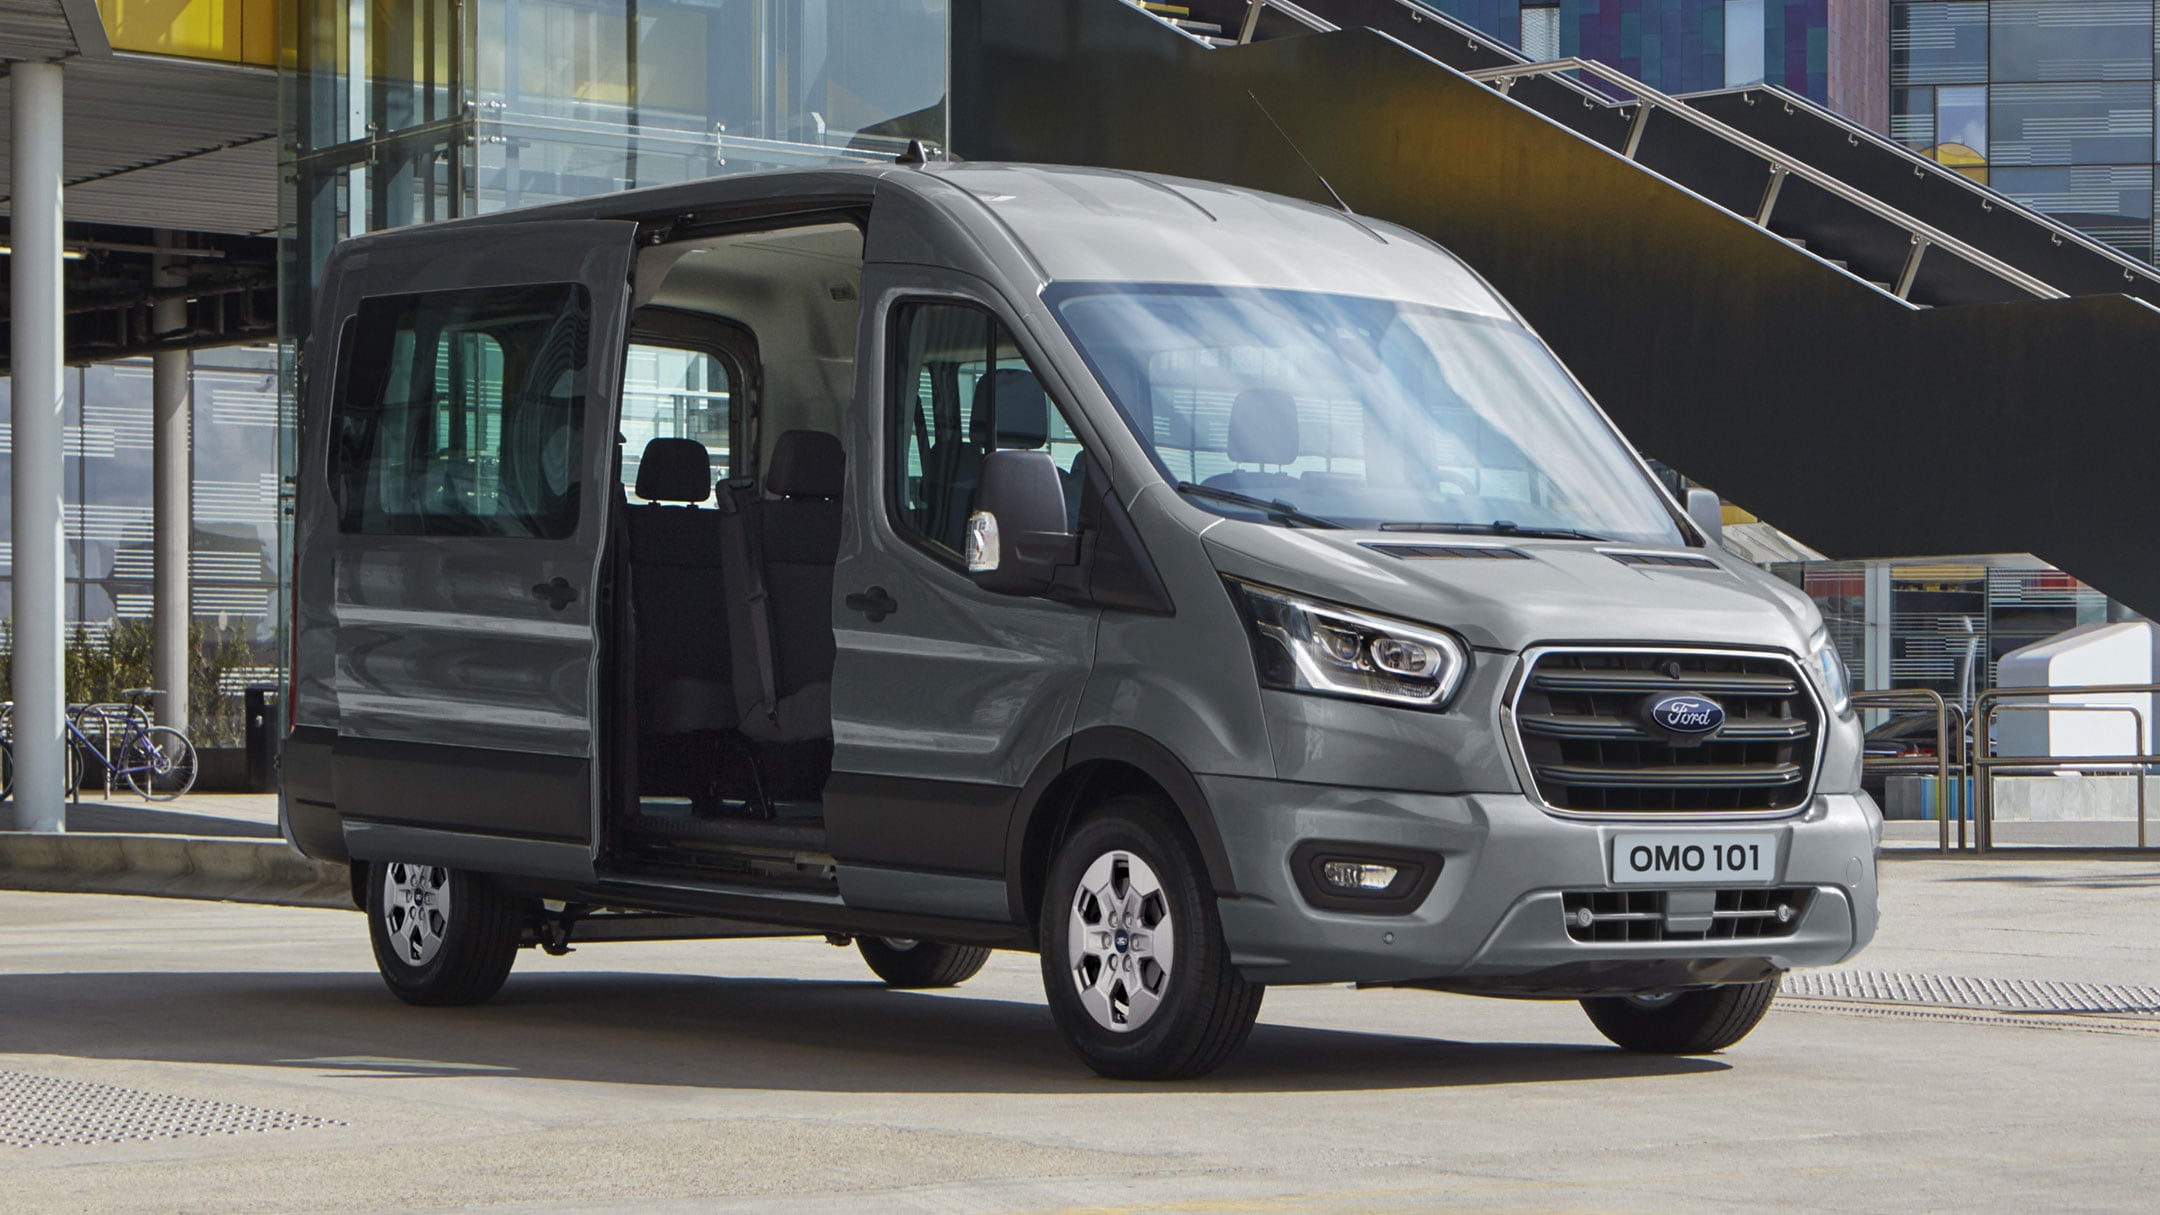 New Ford Transit Minibus parked in front of a modern building with side door open